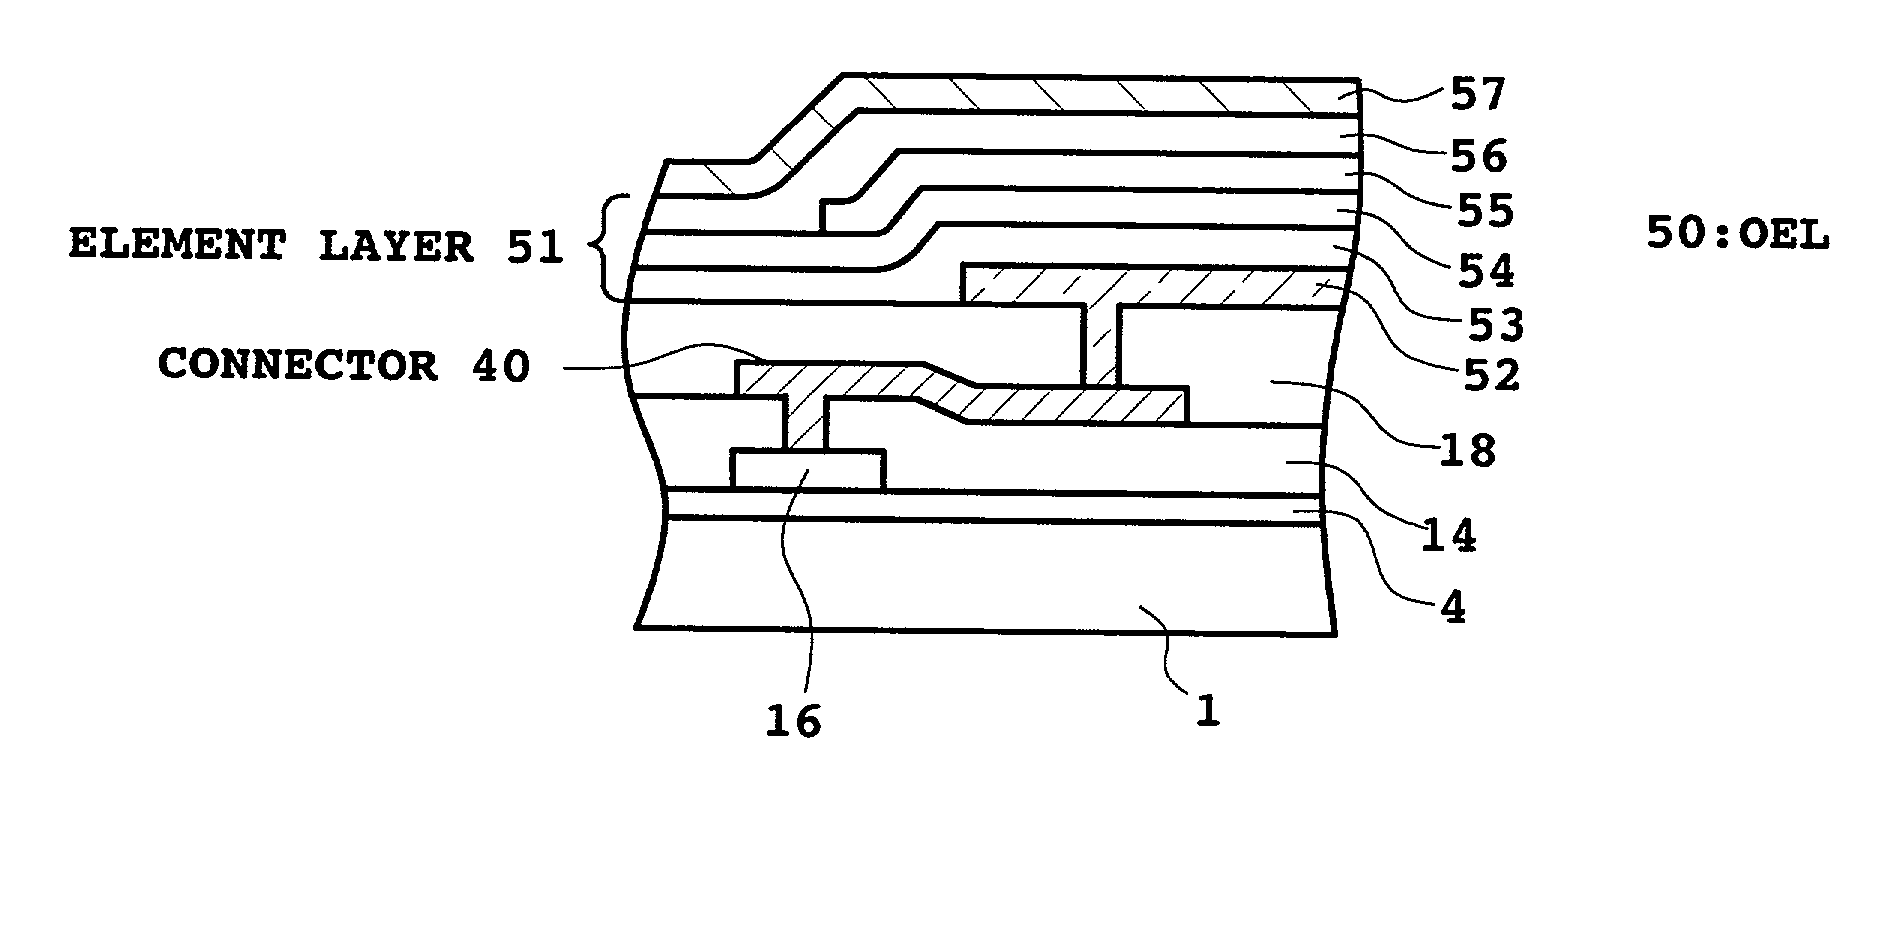 Contact between element to be driven and thin film transistor for supplying power to element to be driven